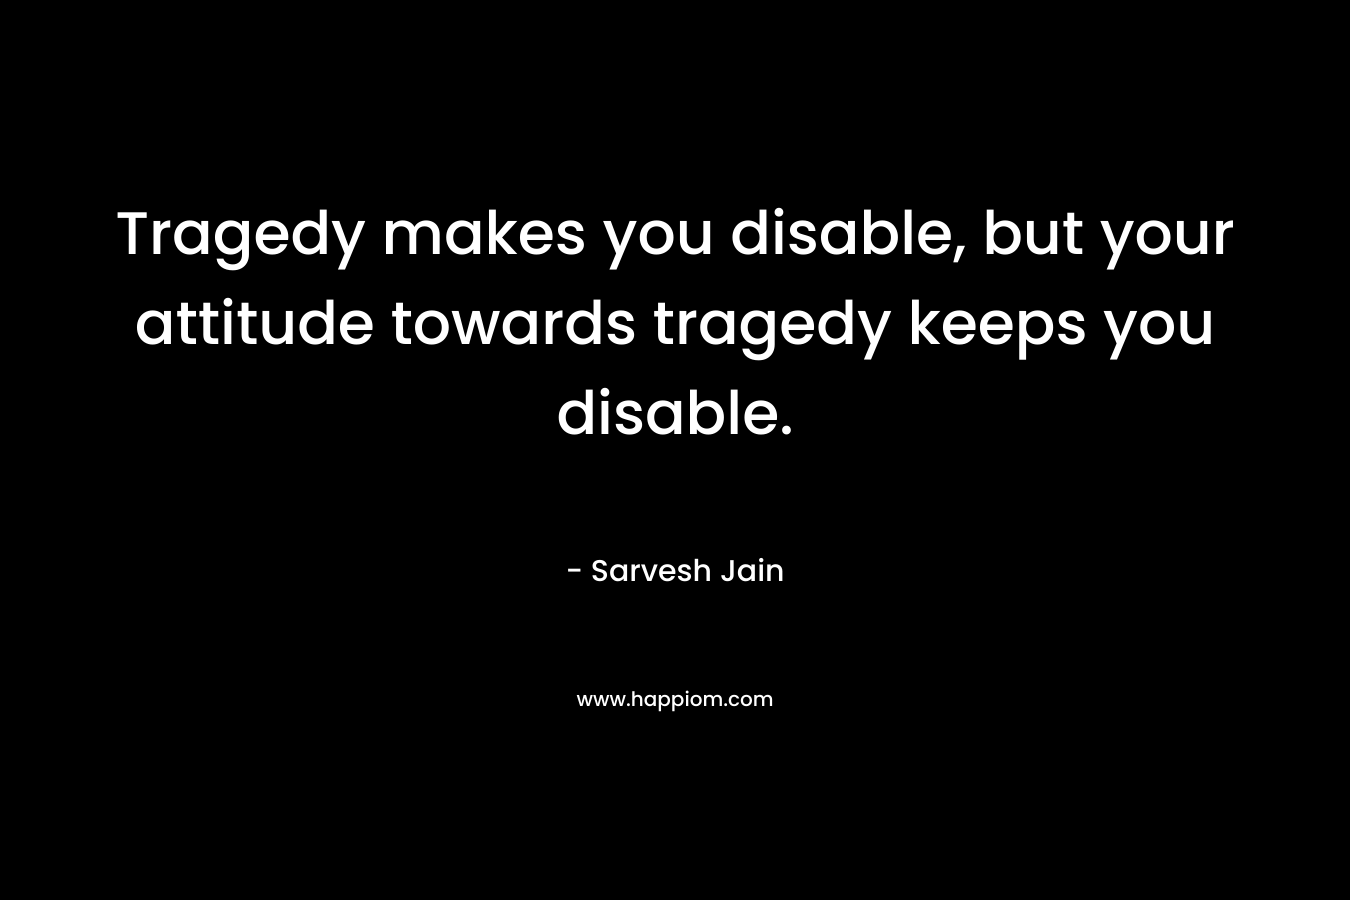 Tragedy makes you disable, but your attitude towards tragedy keeps you disable.